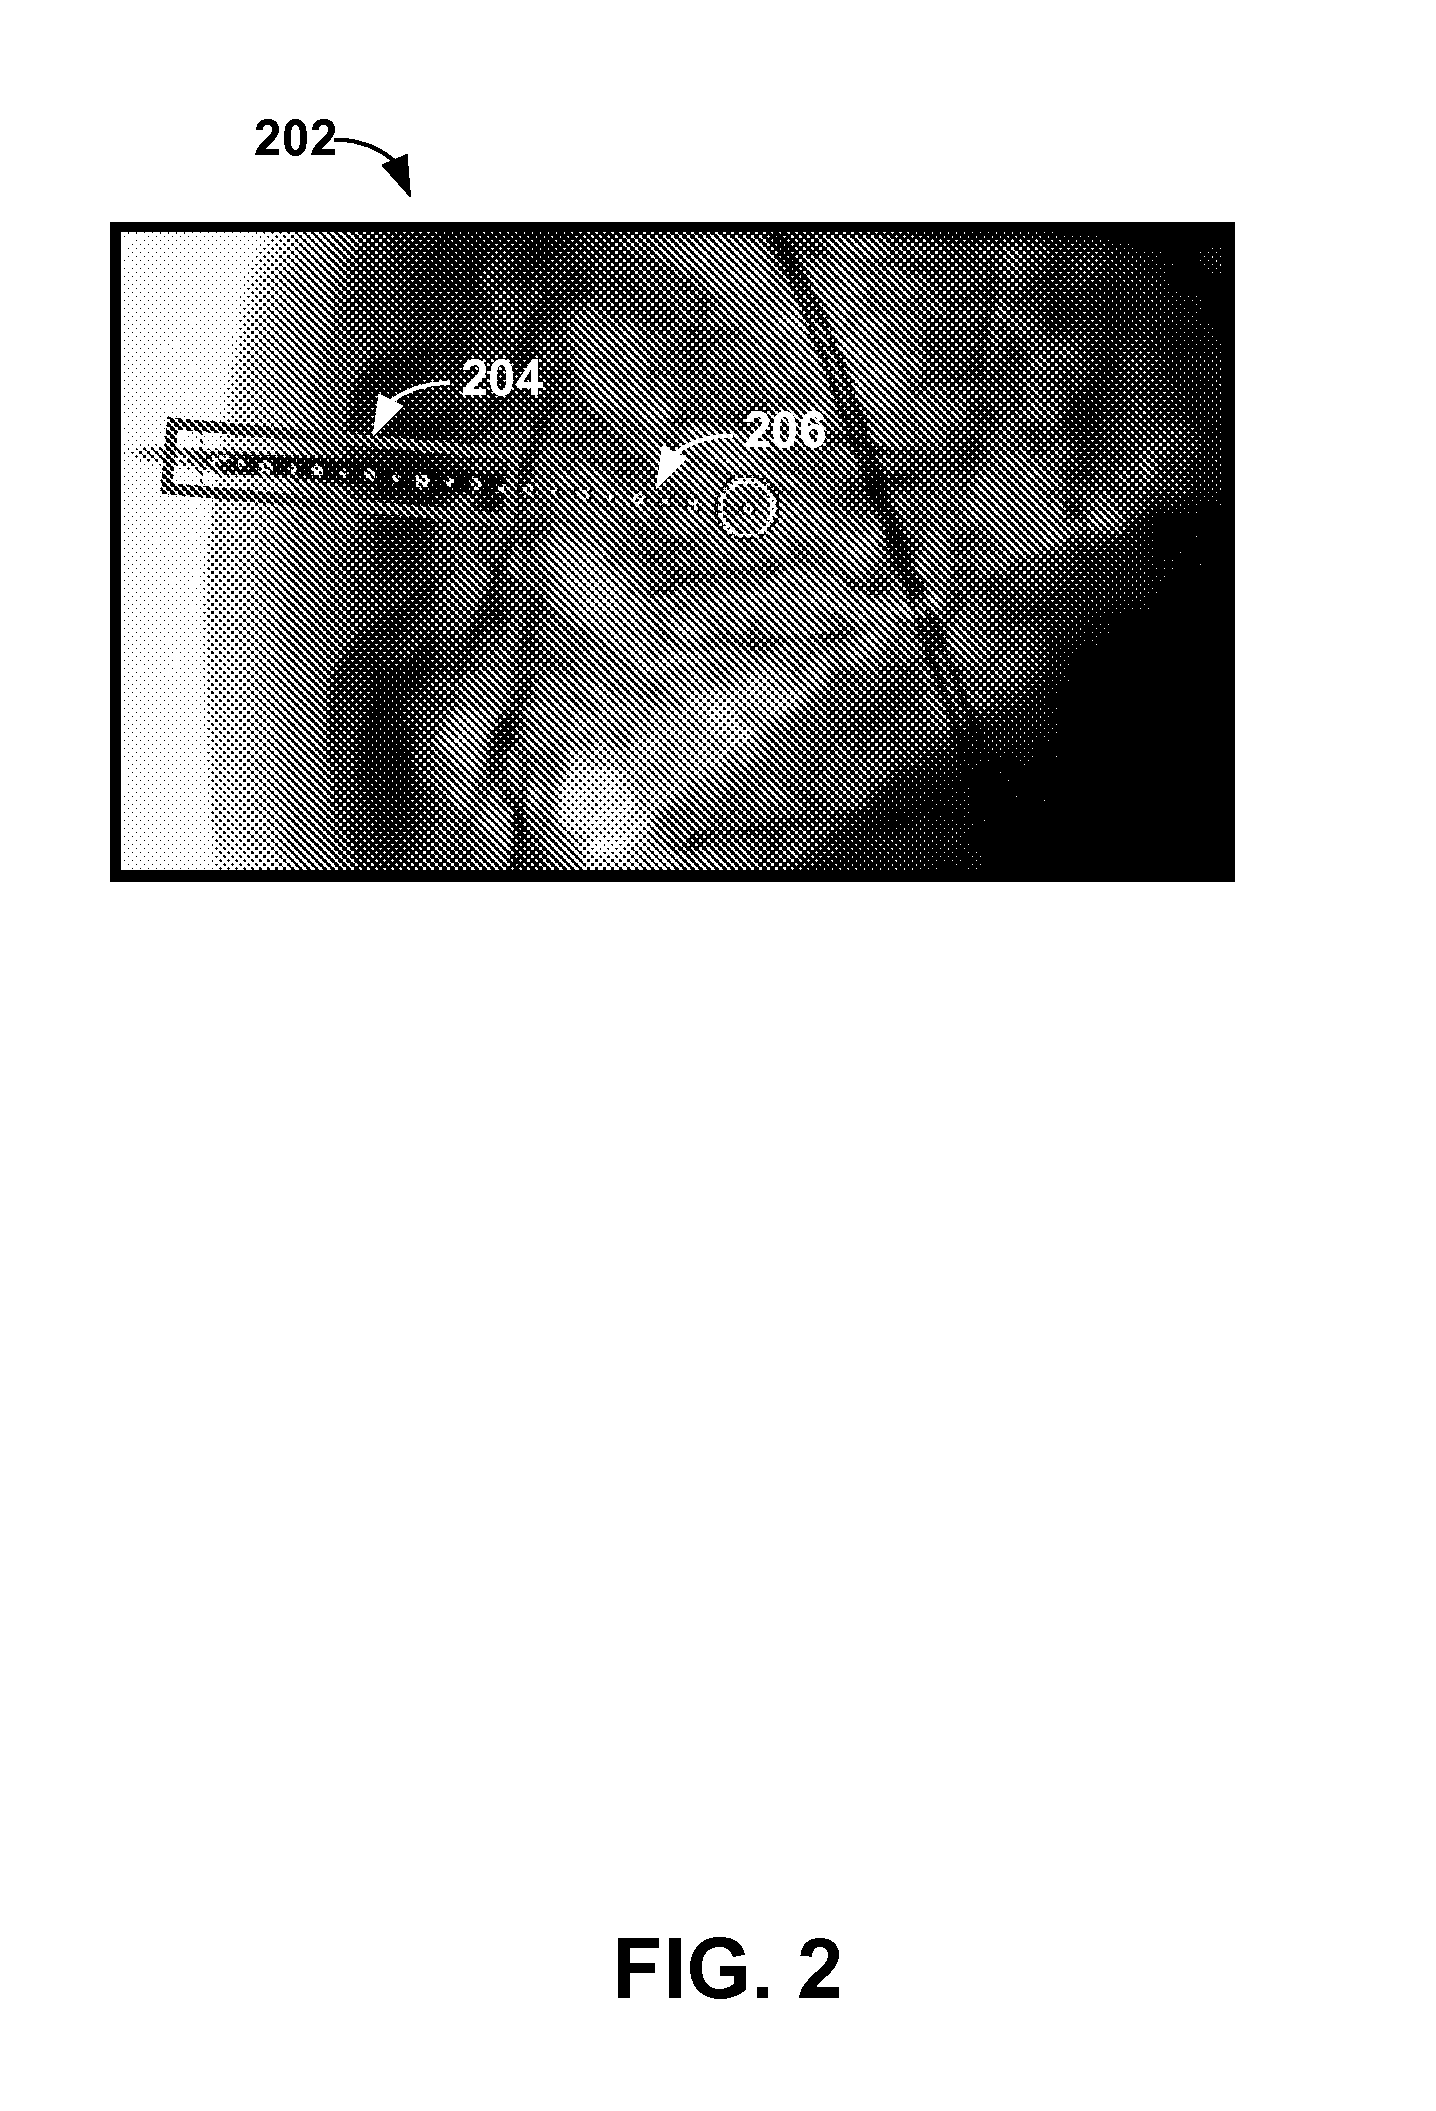 Method and system for obtaining a sequence of x-ray images using a reduced dose of ionizing radiation